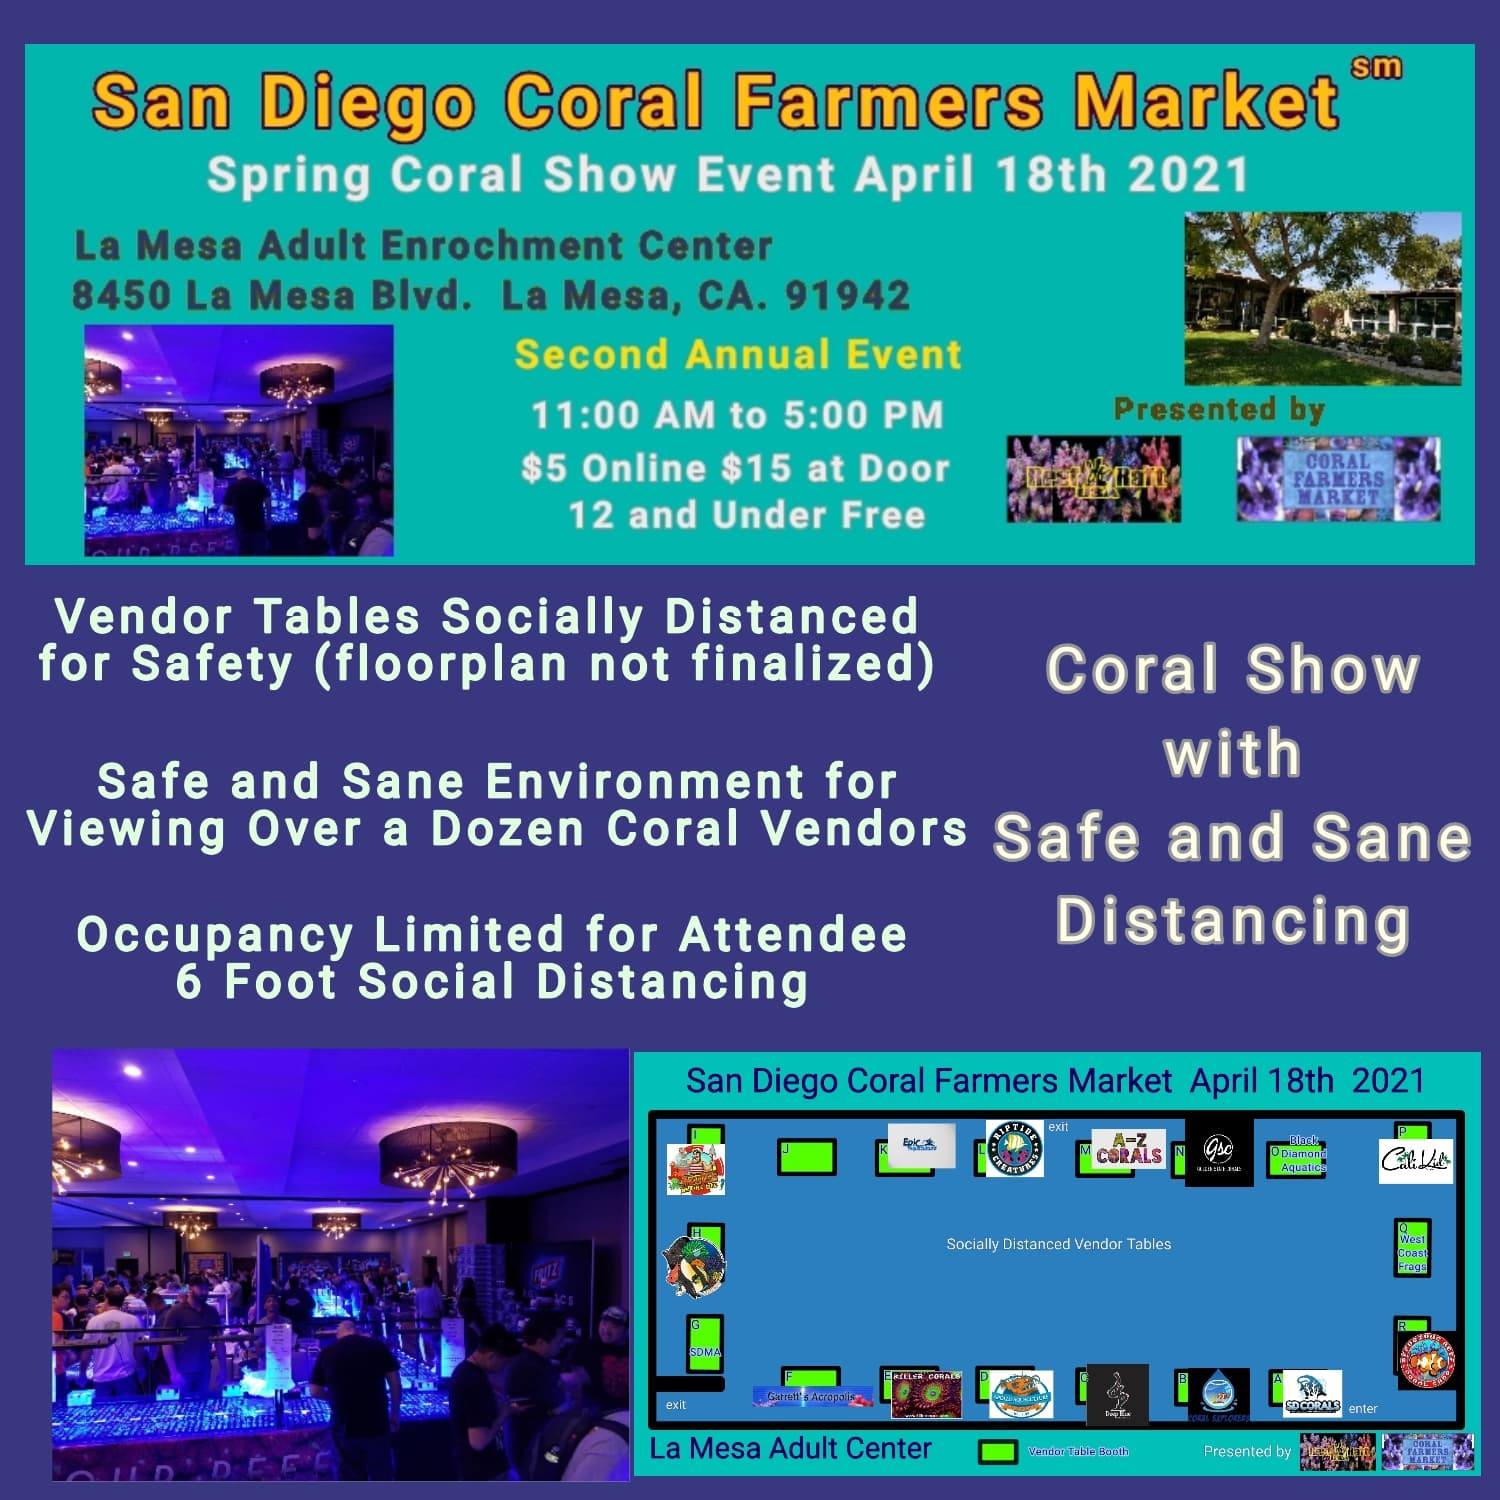 May be an image of text that says 'San Diego Coral Farmers Market Spring Coral Show Event April 18th 2021 La Mesa Adult Enrochment Center 8450 La Mesa Blvd. La Mesa, CA. 91942 Second Annual Event 11:00 AM to 5:00 PM $5 Online $15 at Door 12 and Under Free Presented by PASLREL Vendor Tables Socially Distanced for Safety (floorplan not finalized) Coral Show Safe and Sane Environment for with Viewing Over a Dozen Coral Vendors Safe and Sane Distancing Occupancy Limited for Attendee 6 Foot Social Distancing San Diego Coral Farmers Market April 18th 2021 Epik 발더 CaliLot DMA Mesa Adult Center TBooh CORALS Presented P'